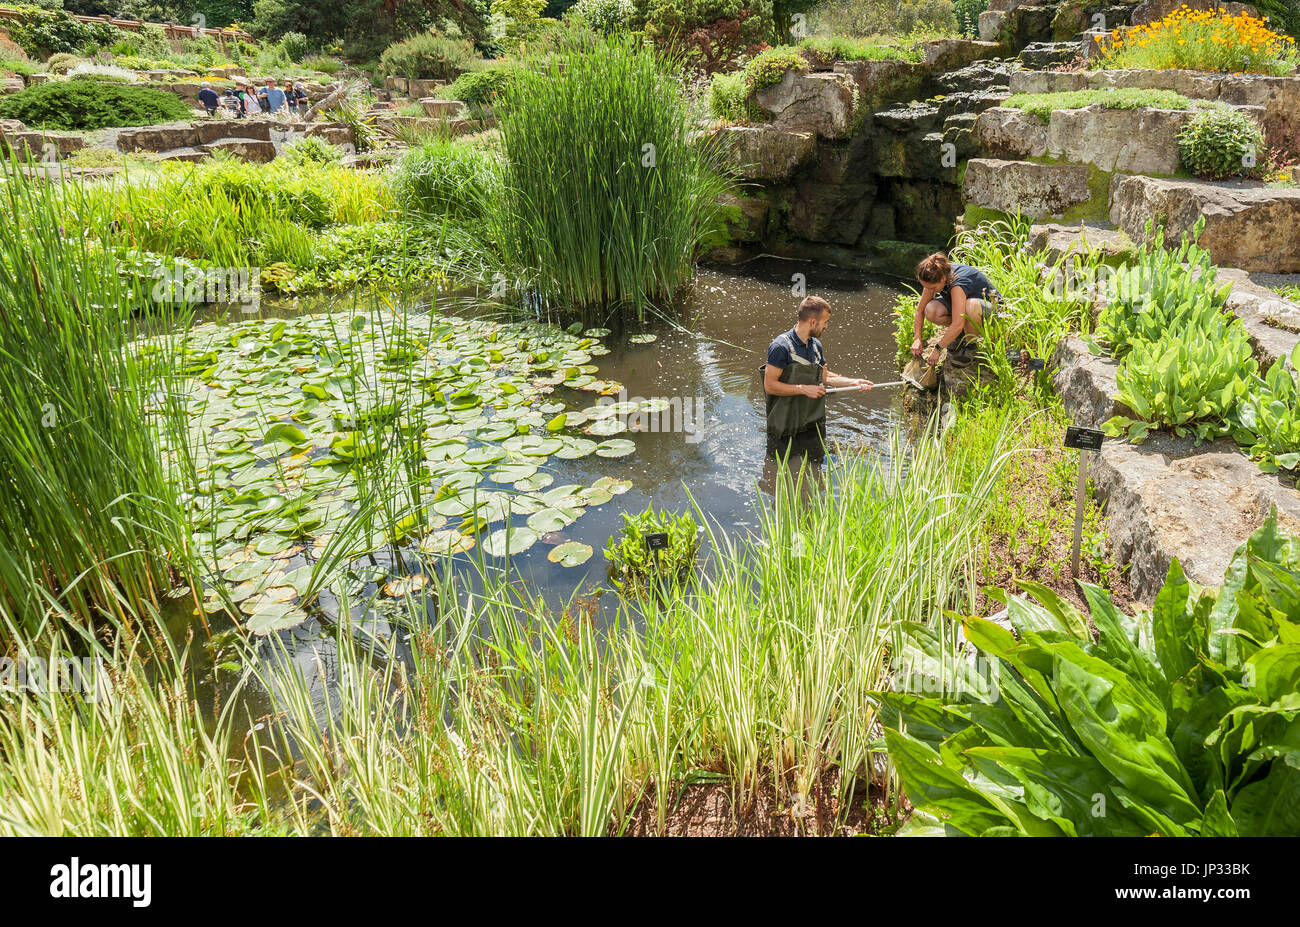 Kew gardens, workers maintaining a pond in the rock garden area. Stock Photo